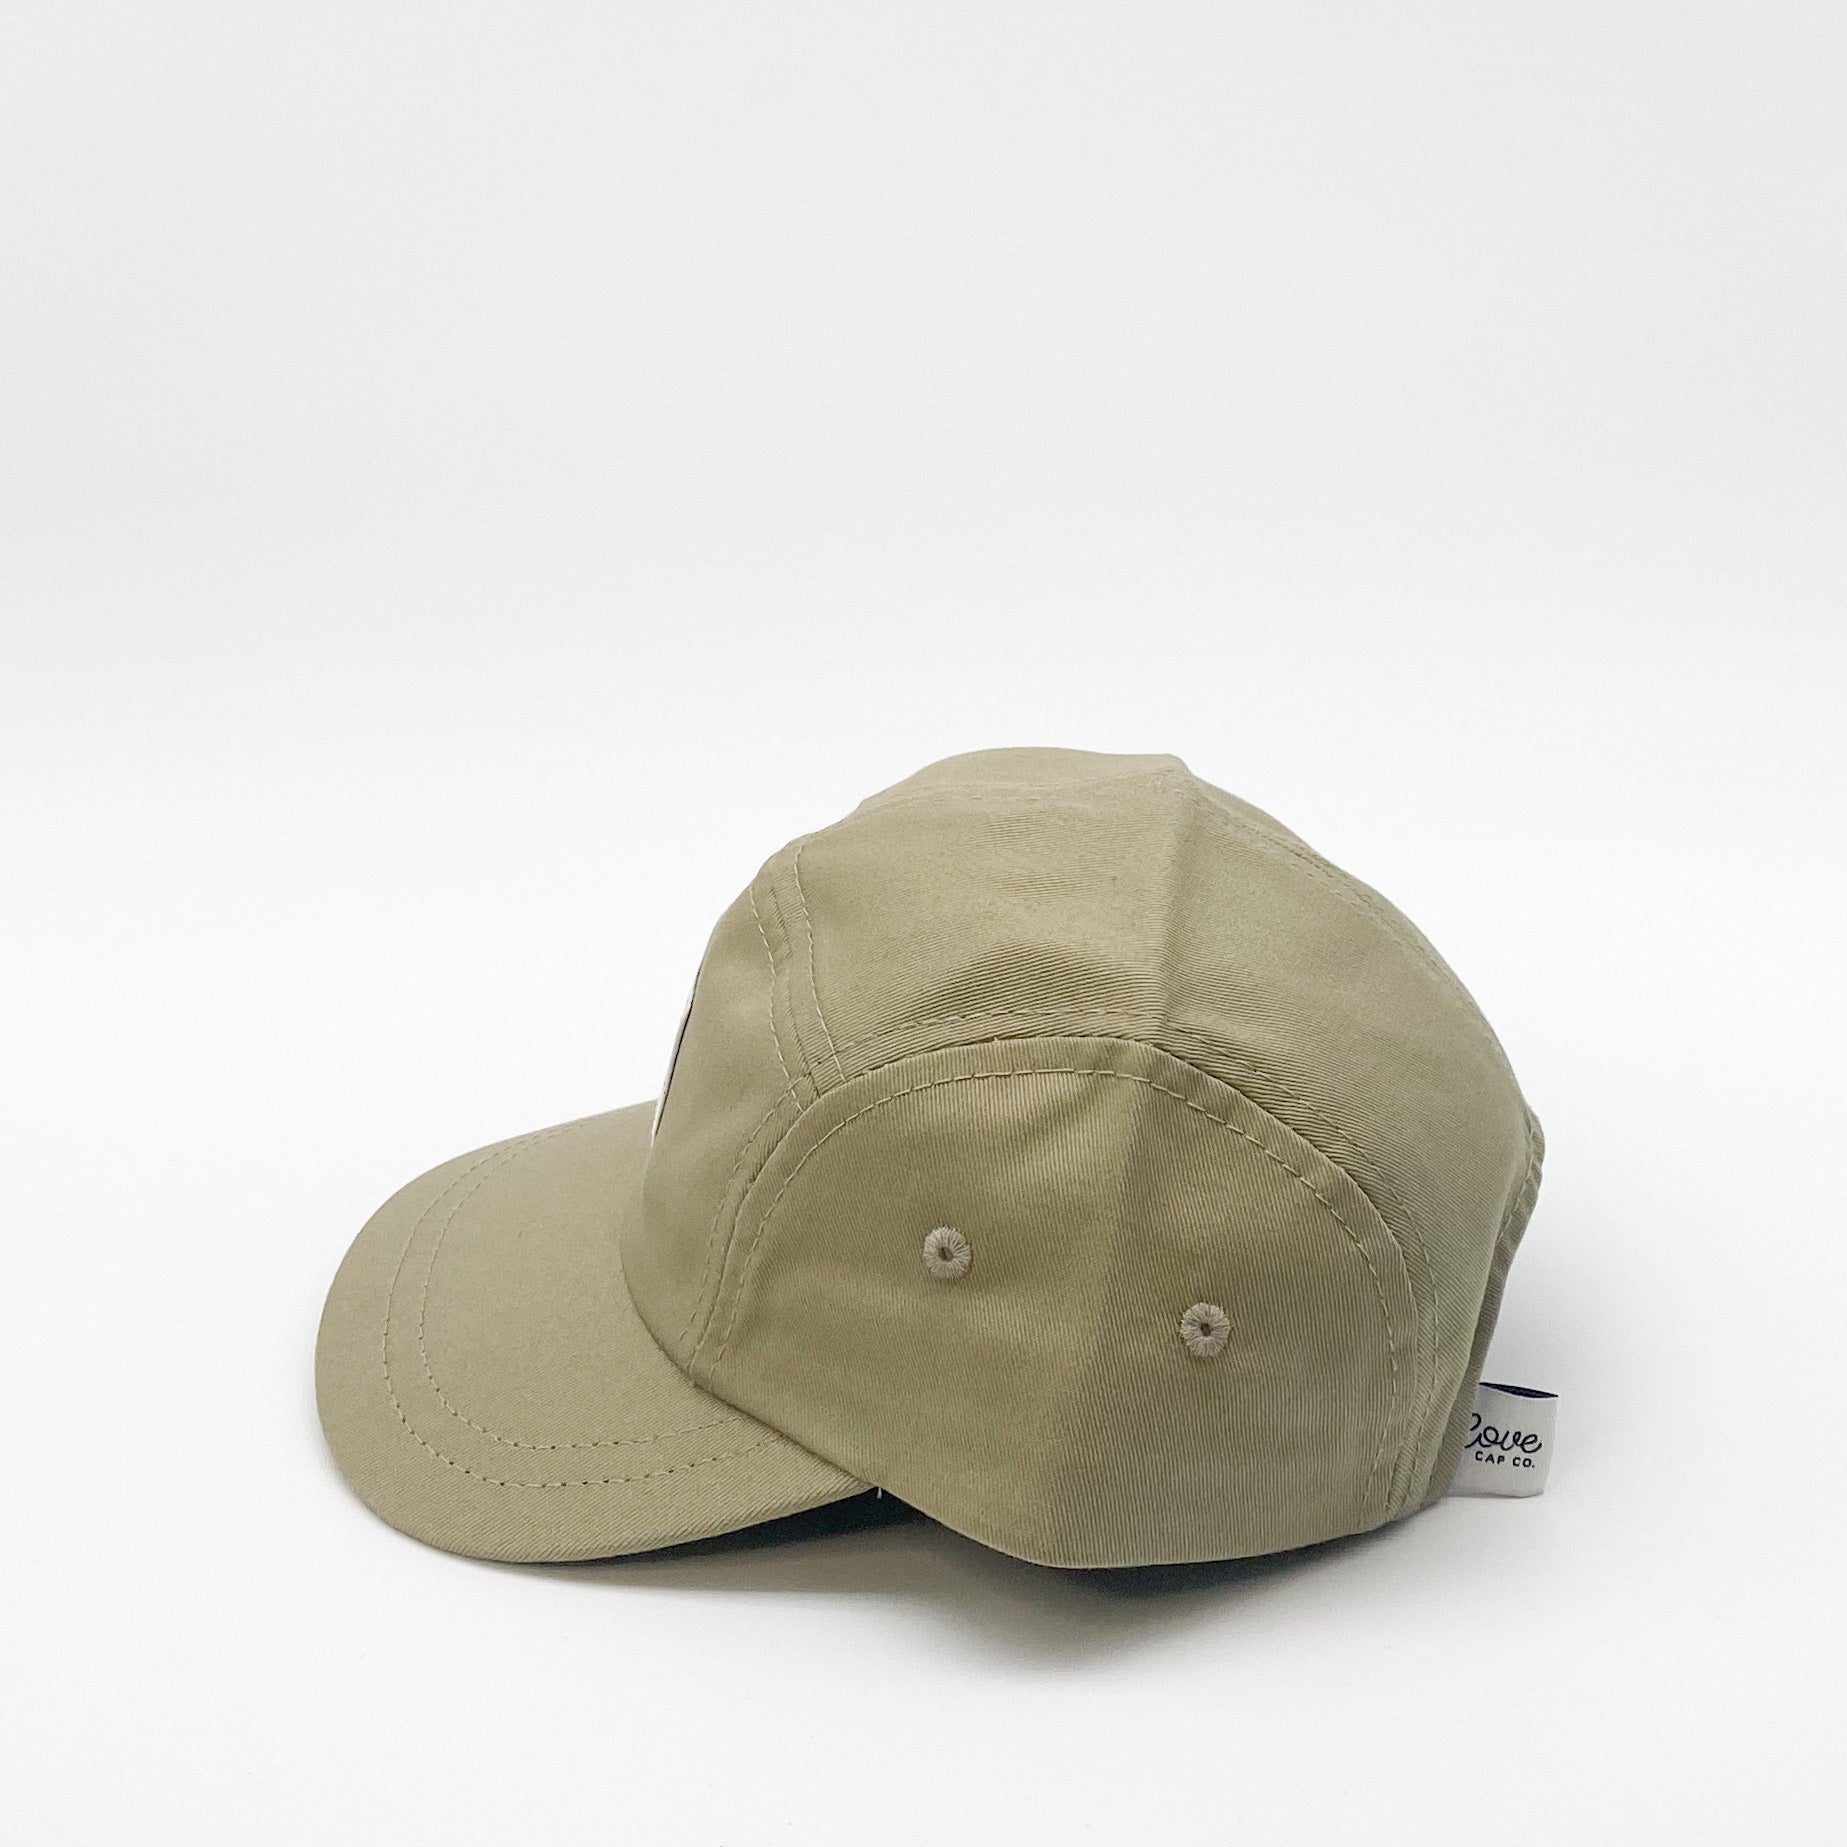 Toddler Organic Cotton Five-Panel Hat | Made in Canada – Cove Cap 